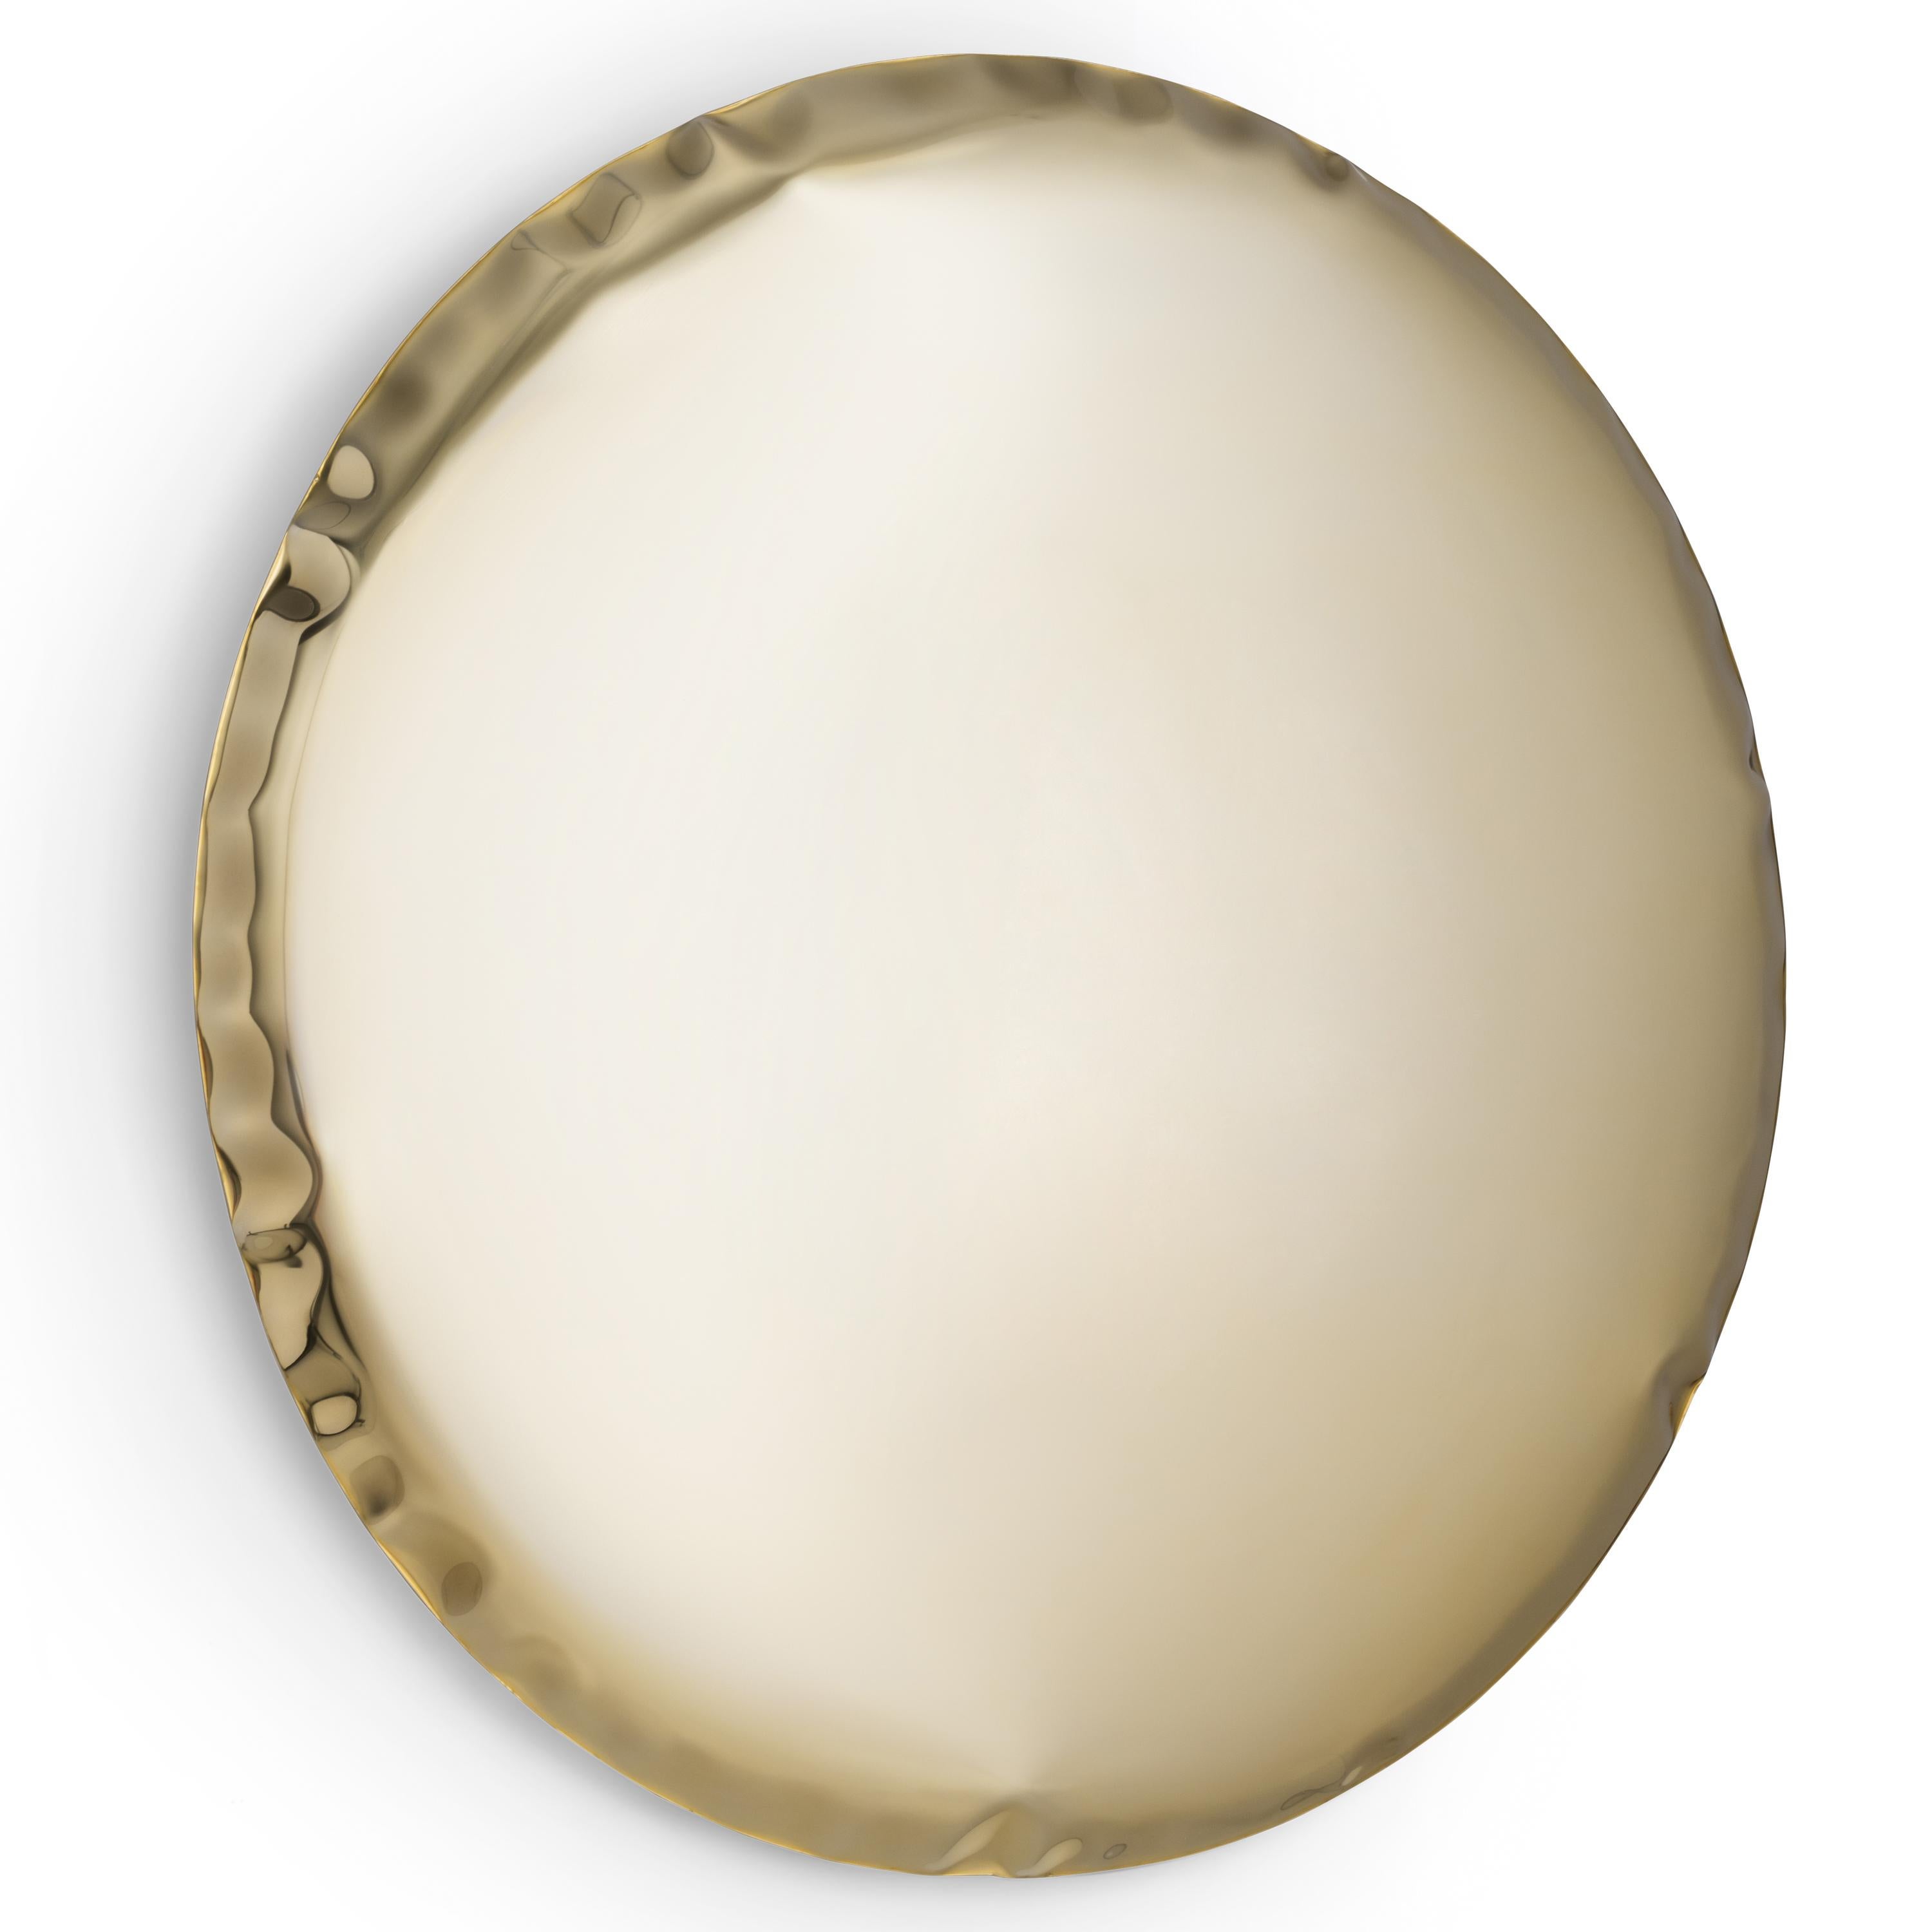 Stainless Steel Contemporary Mirror 'OKO 120', Aurum Collection, Light Gold, by Zieta For Sale